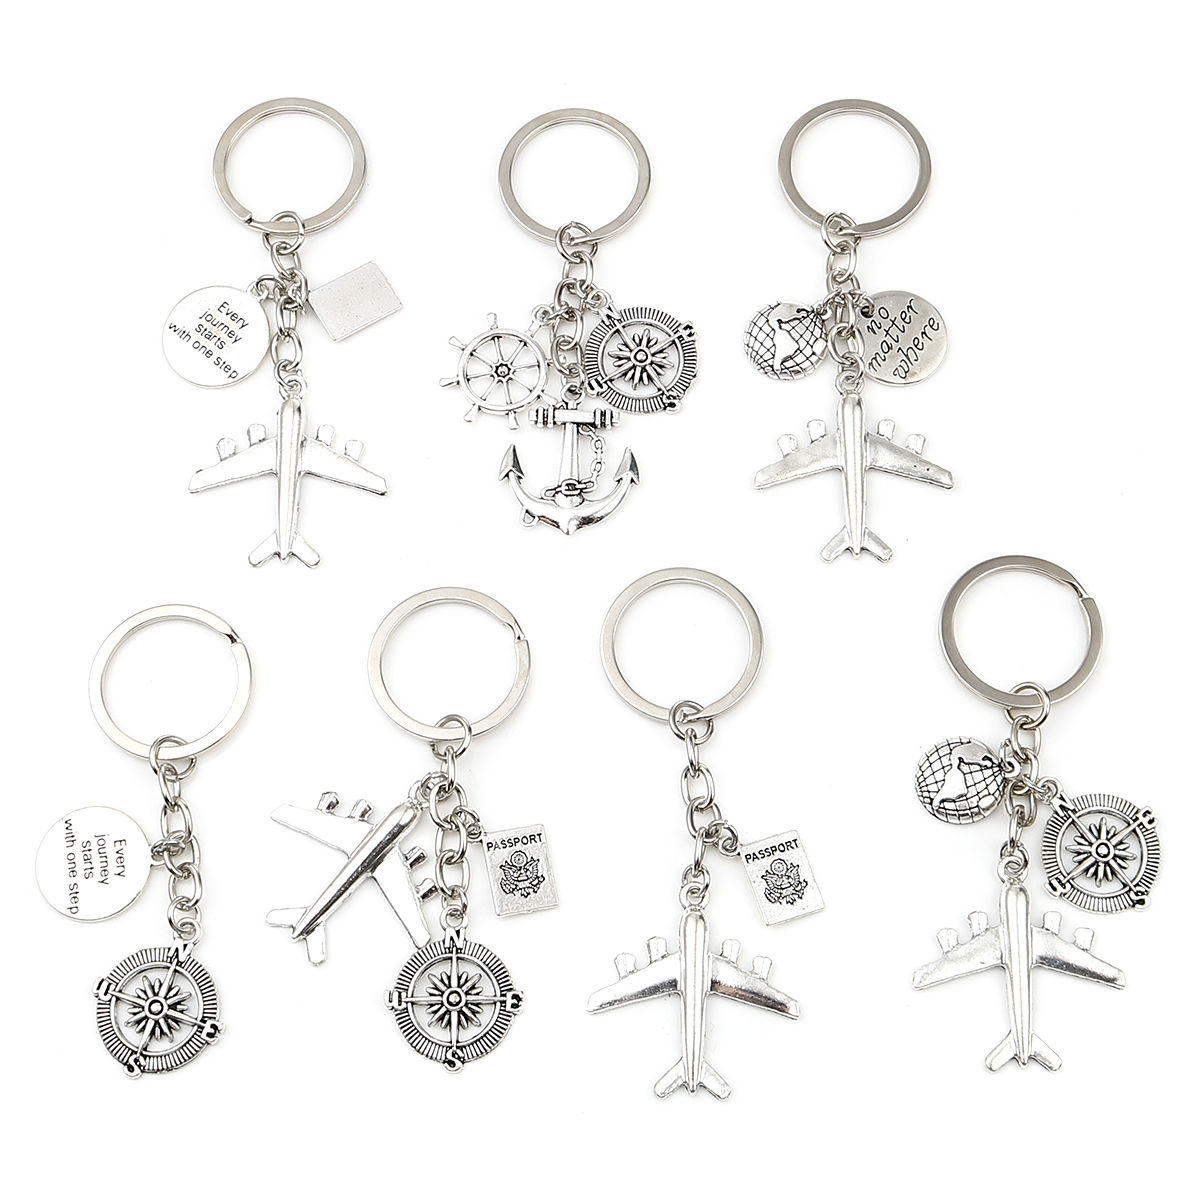 Picture of Travel Keychain & Keyring Antique Silver Color Passport Airplane Message " Every journey starts with one step " 10cm, 1 Piece